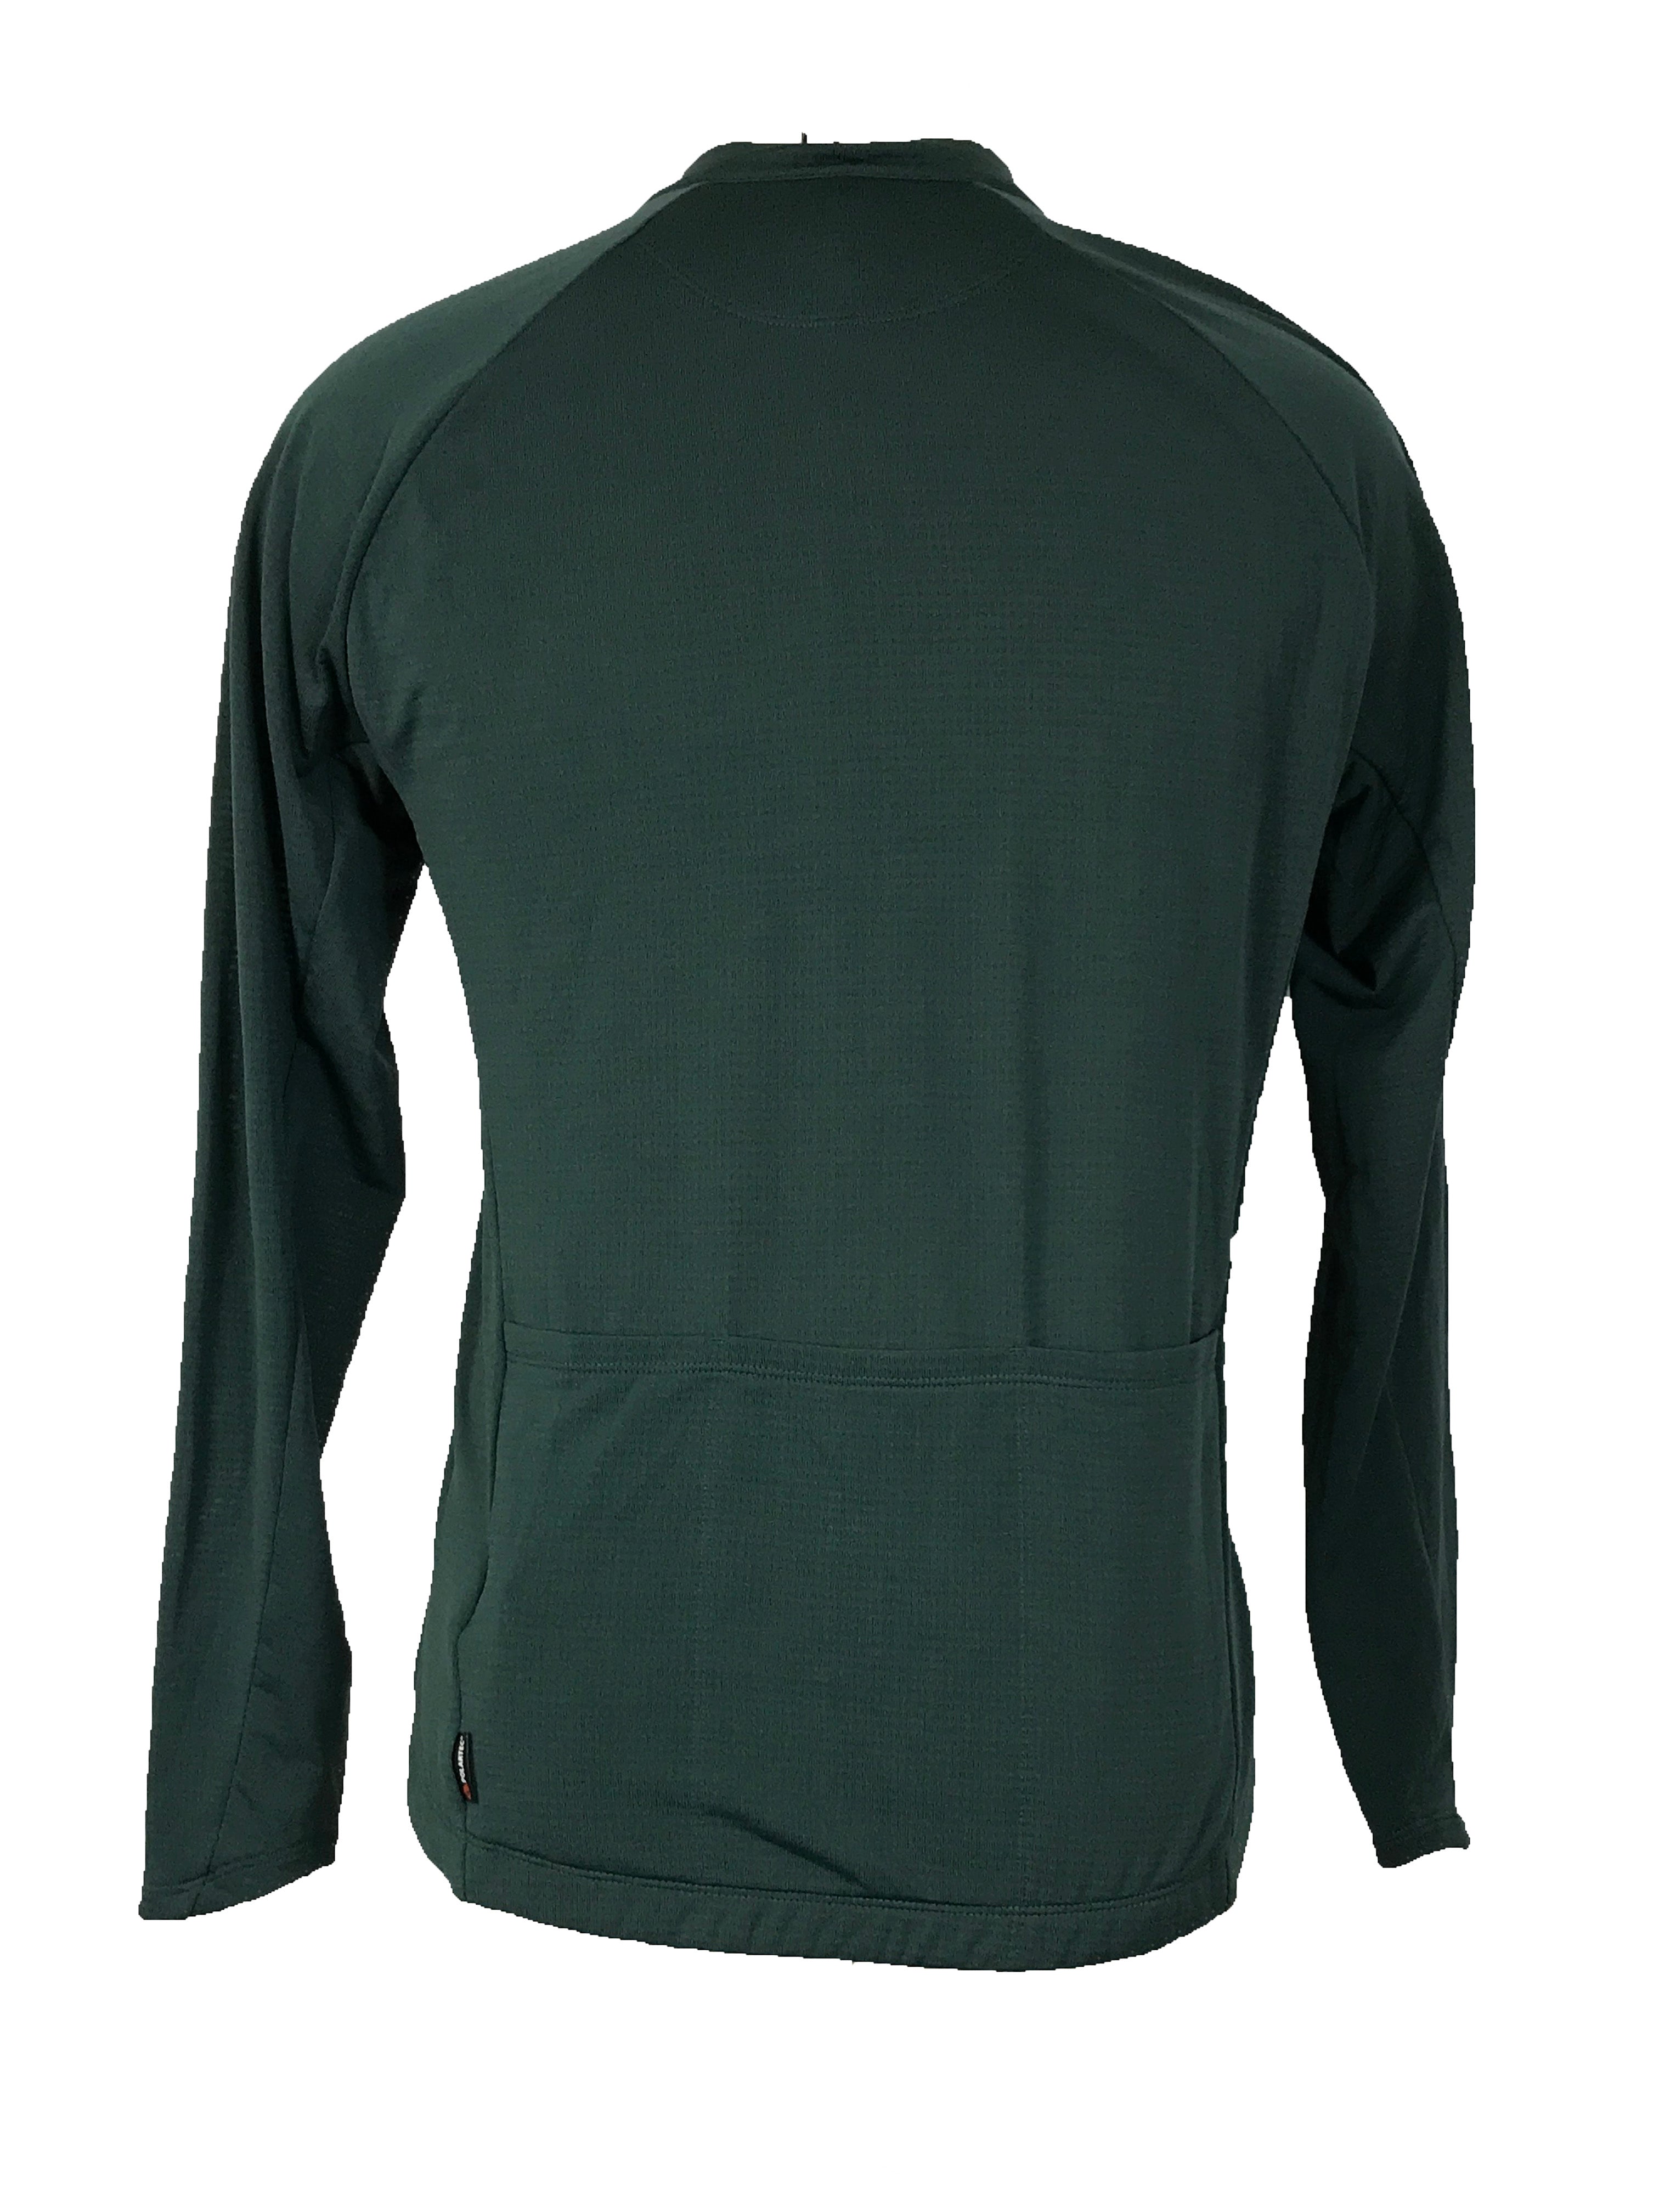 Specialized Prime Series Forest Green Thermal Long Sleeve Jersey Men's Size L NWT